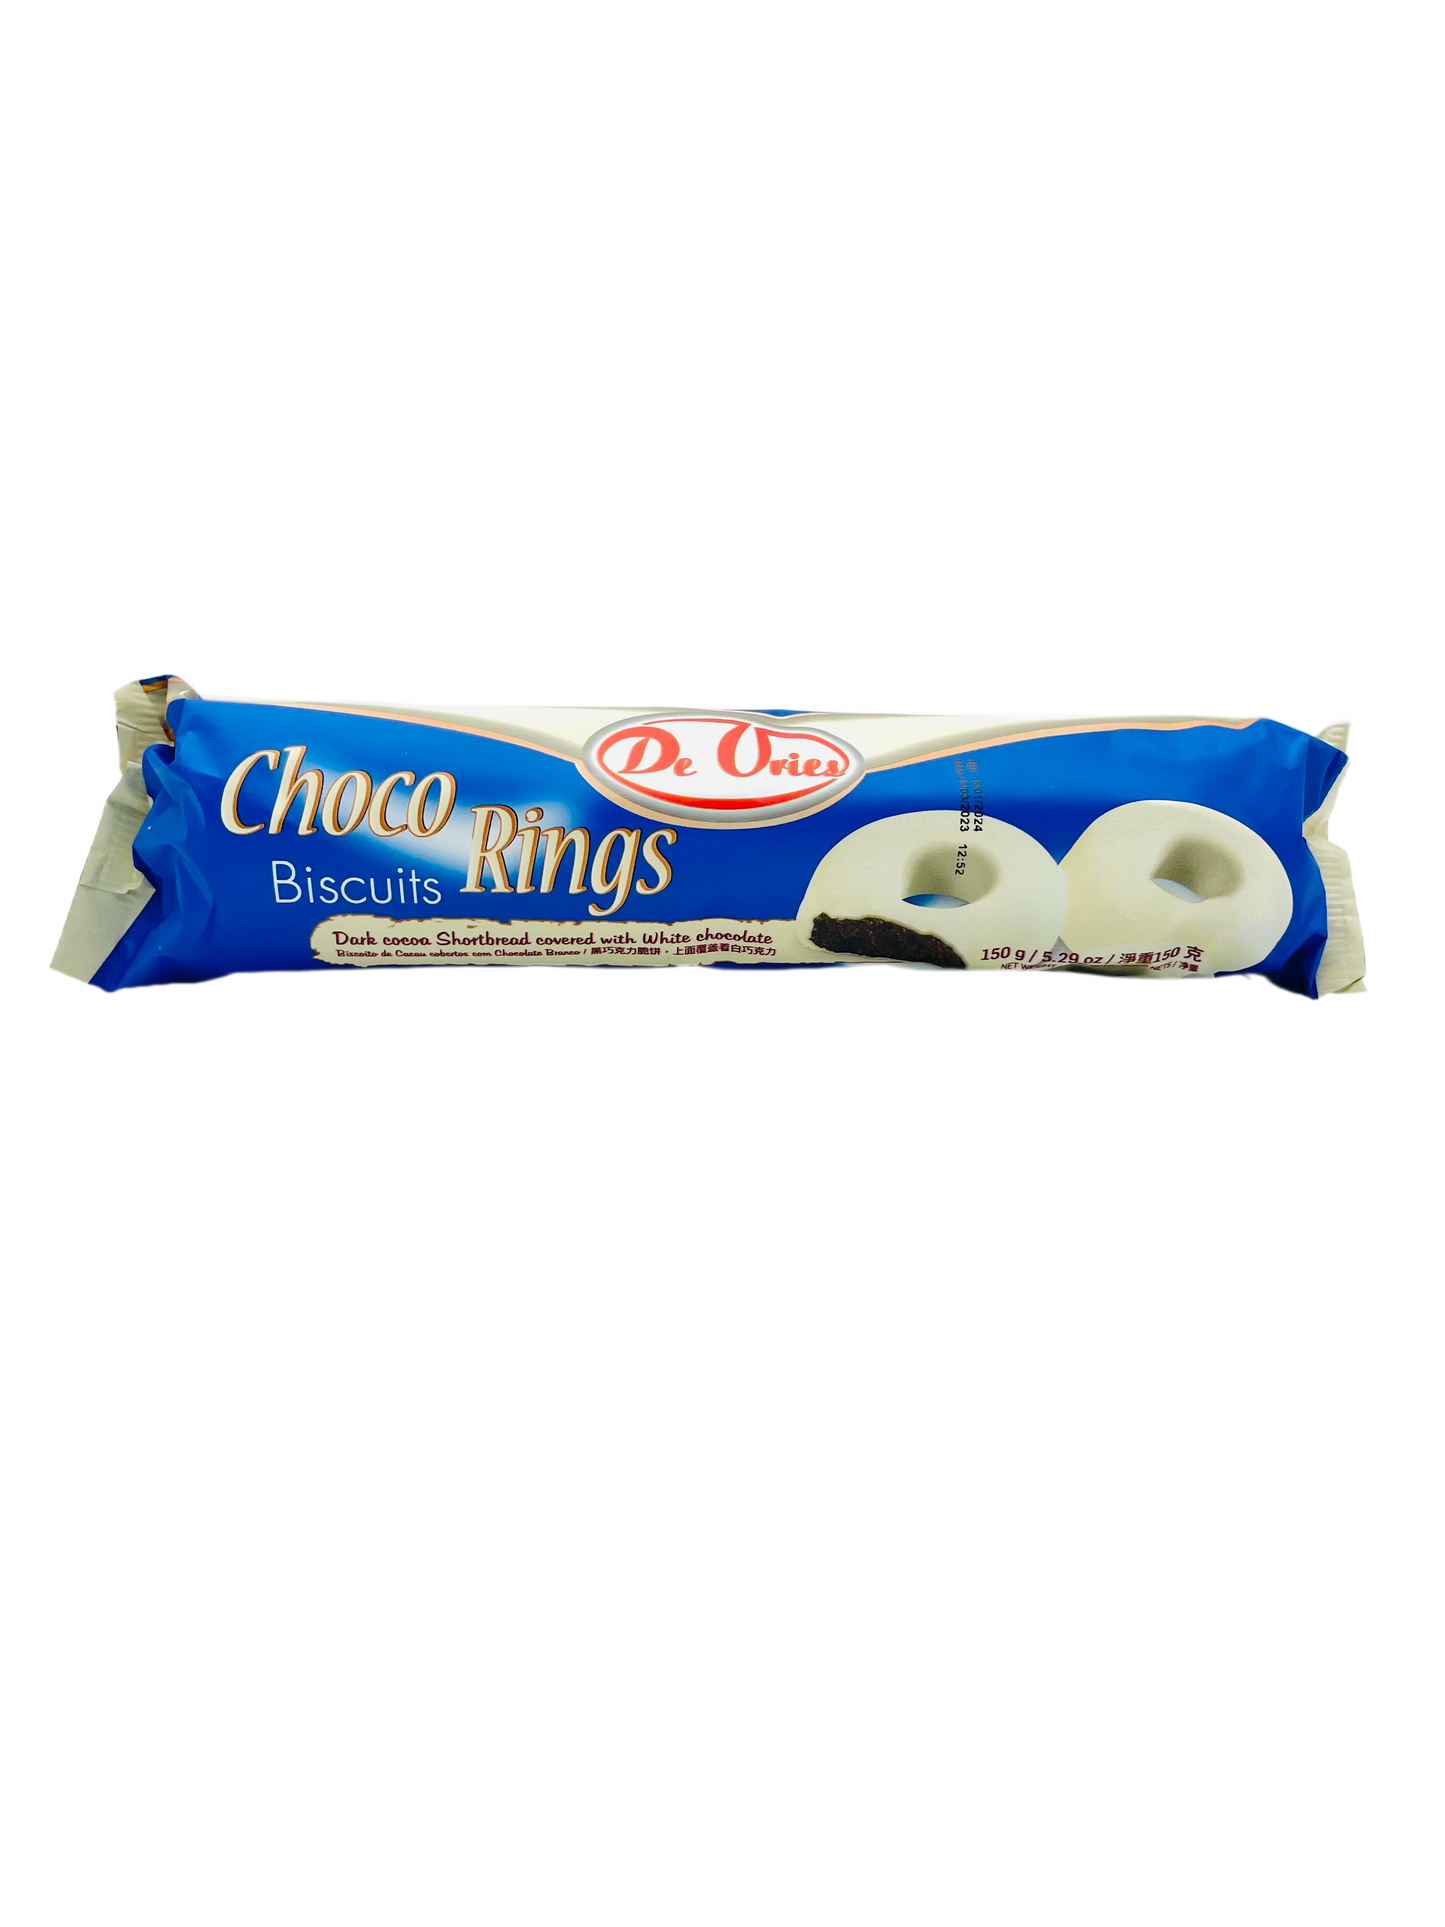 De Vries Choco Rings White Choc Covered Biscuits 150g